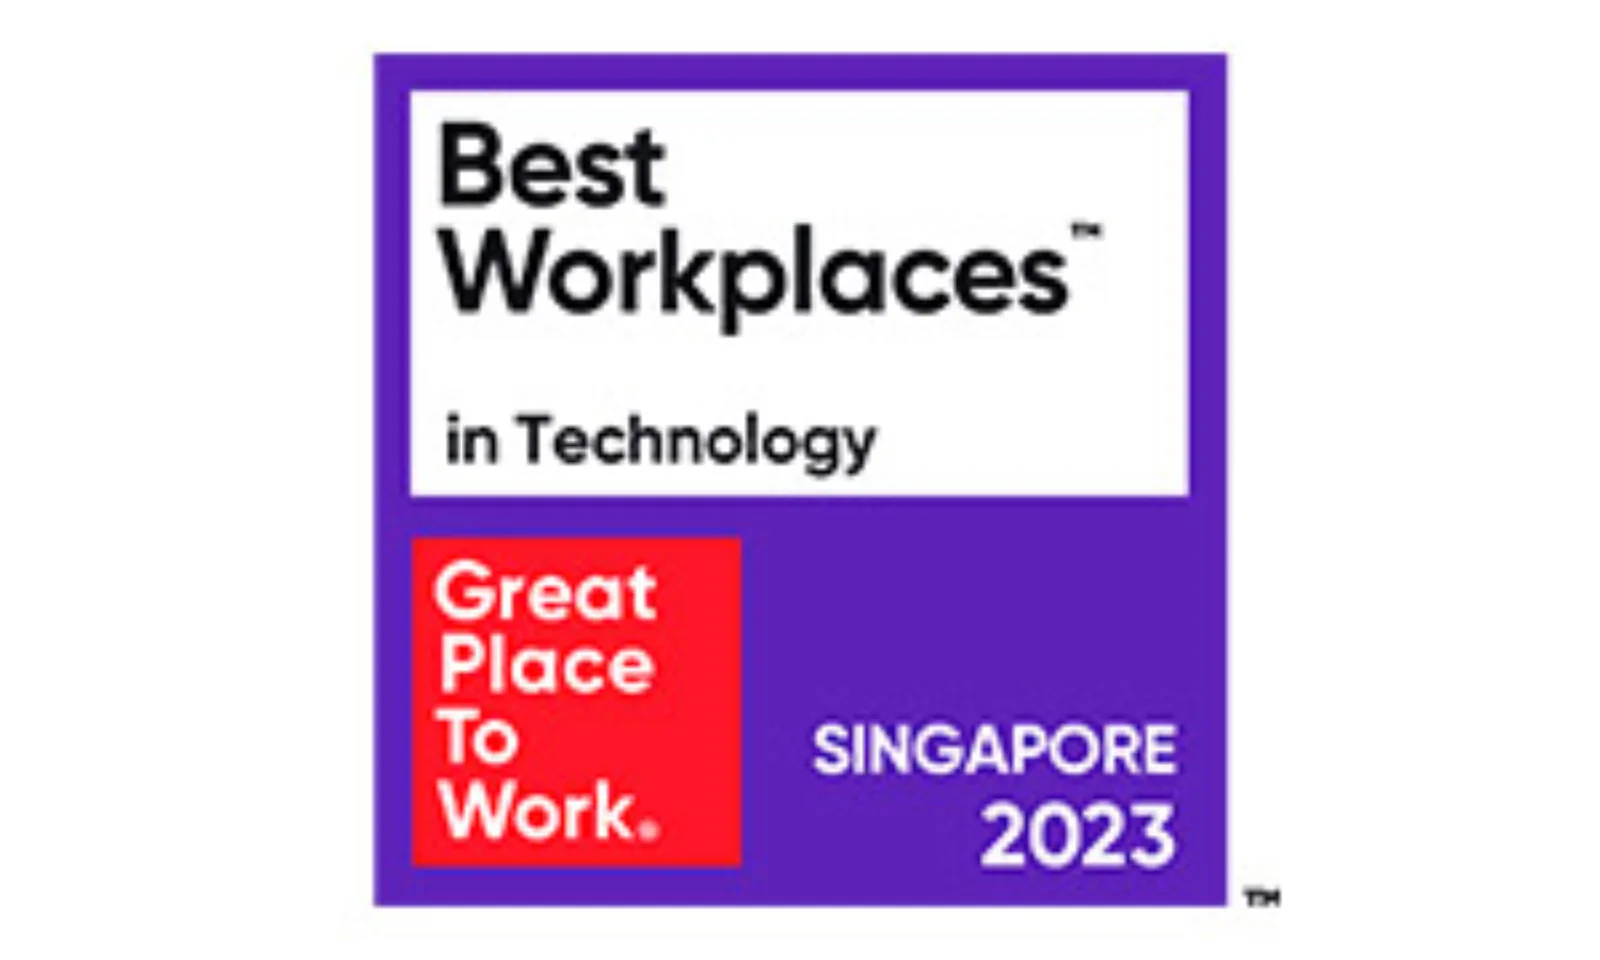 The Singapore Best Workplaces™ in Technology list is determined using Great Place To Work Survey, based on 10,000 responses representing approximately 20,000 employees survey.